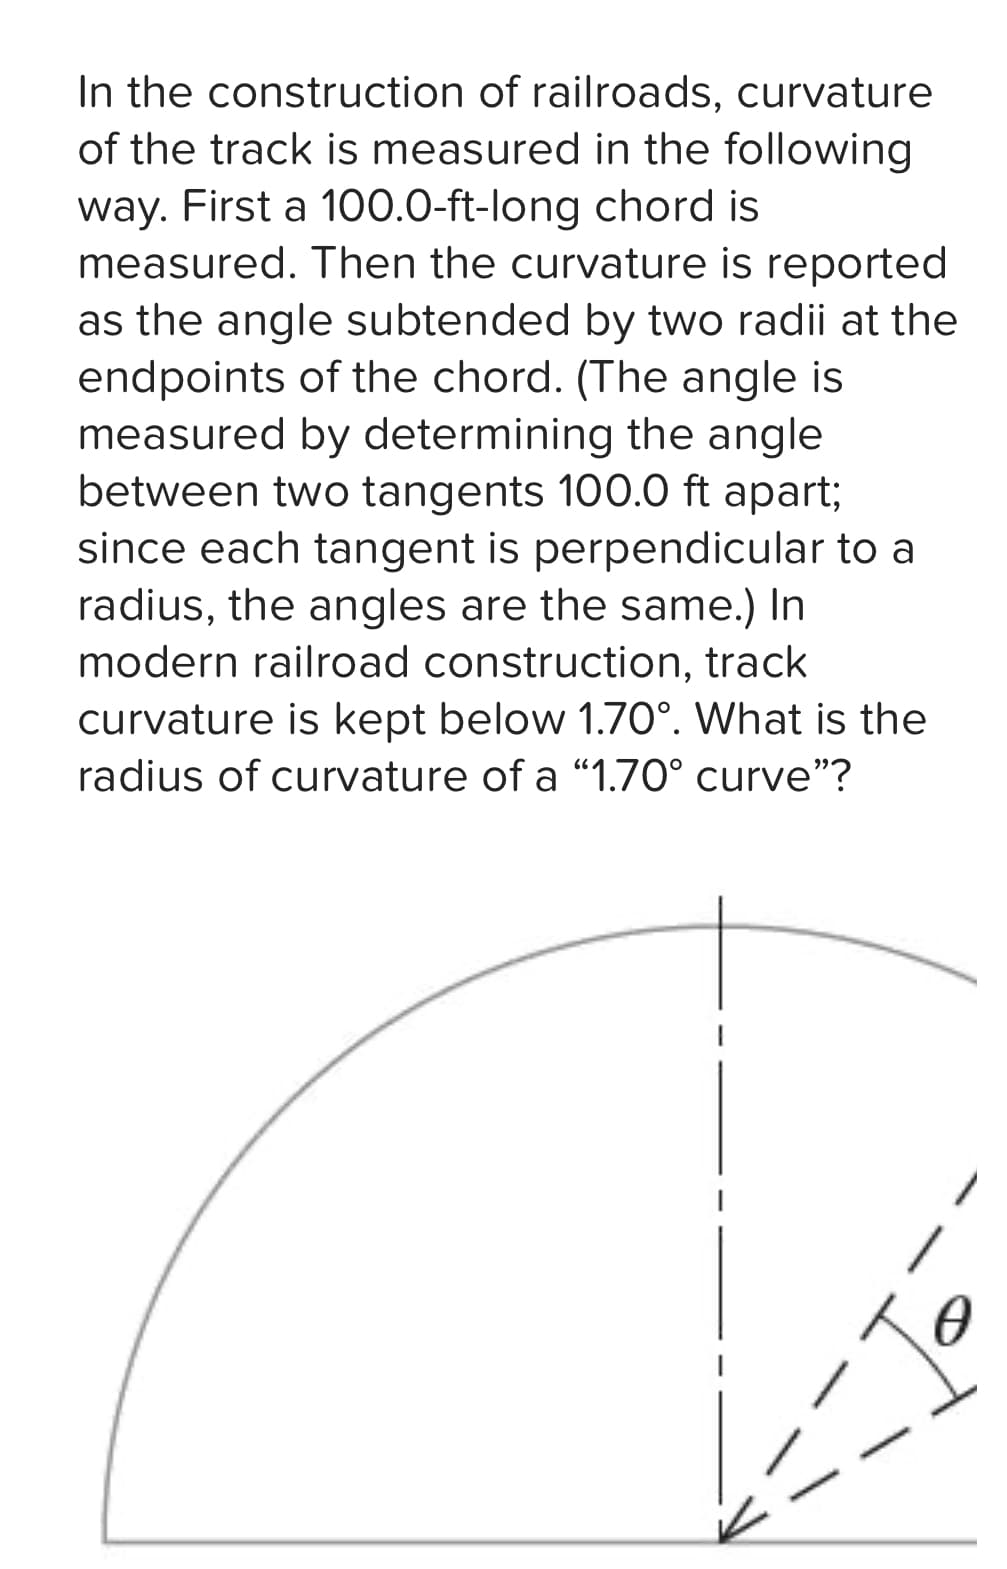 In the construction of railroads, curvature
of the track is measured in the following
way. First a 100.0-ft-long chord is
measured. Then the curvature is reported
as the angle subtended by two radii at the
endpoints of the chord. (The angle is
measured by determining the angle
between two tangents 100.0 ft apart;
since each tangent is perpendicular to a
radius, the angles are the same.) In
modern railroad construction, track
curvature is kept below 1.70°. What is the
radius of curvature of a "1.70° curve"?
Io